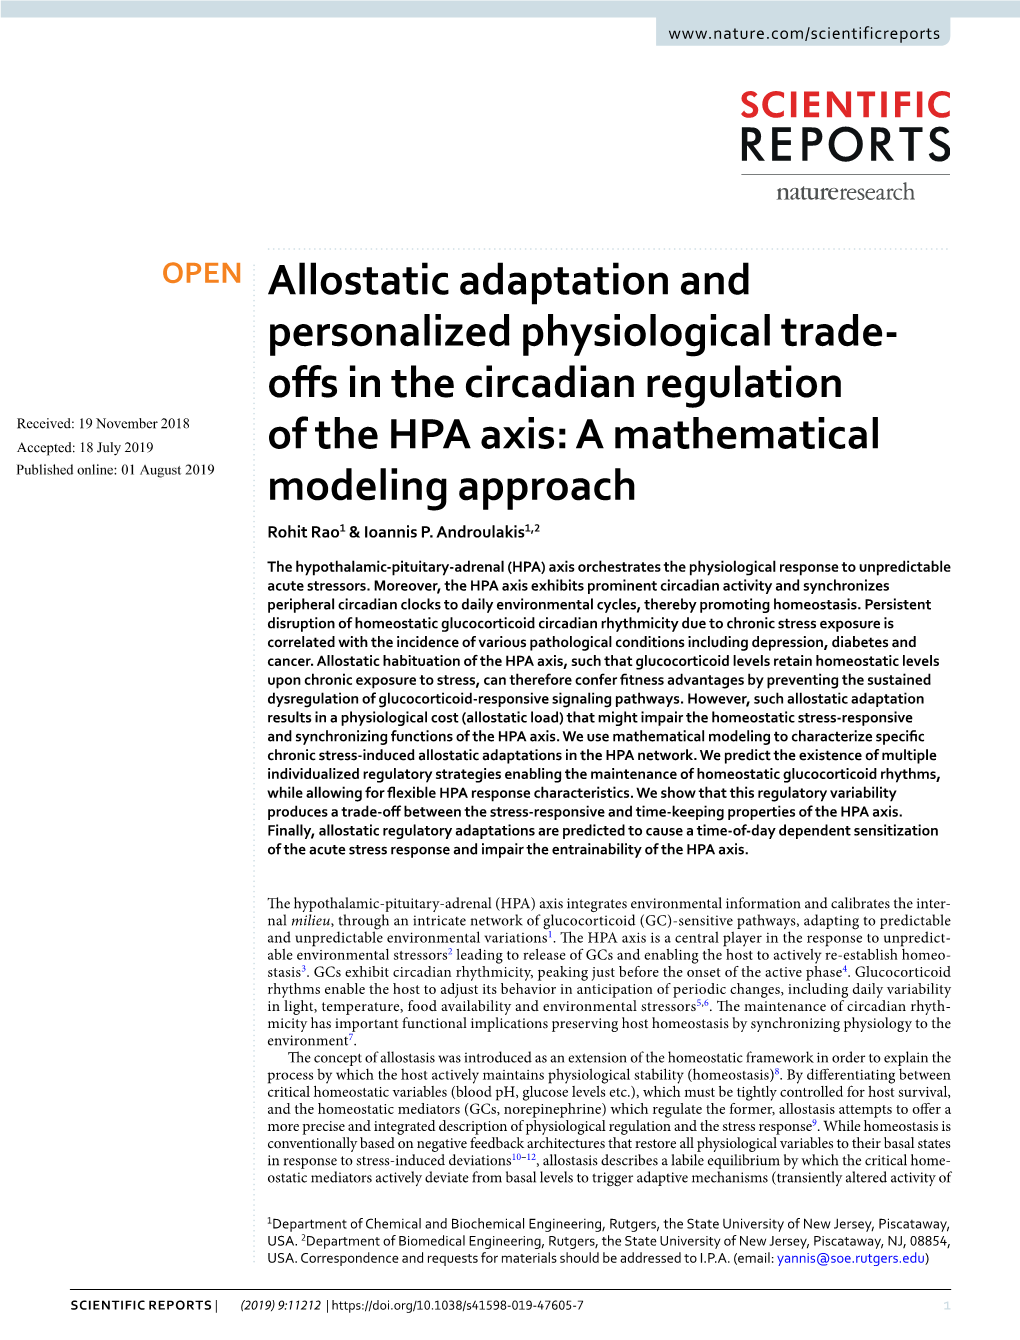 Allostatic Adaptation and Personalized Physiological Trade-Offs In